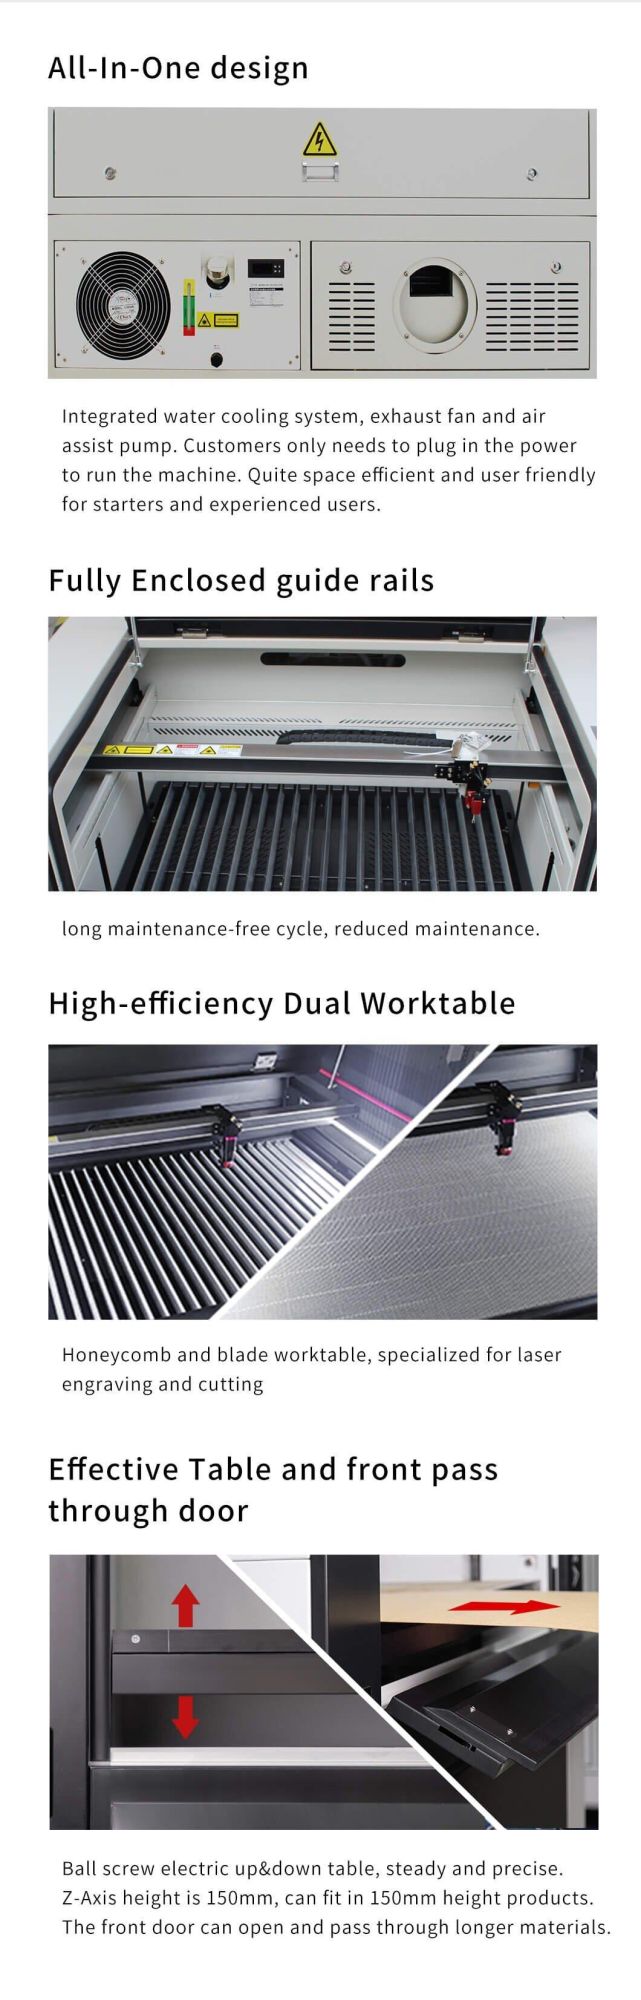 High-Speed Mira9 900mm*600mm DIY Laser Cutting Machine with WiFi Autofocus Camera for Wood/Acrylic/Glass/Plastic/Leather/Polywood/MDF